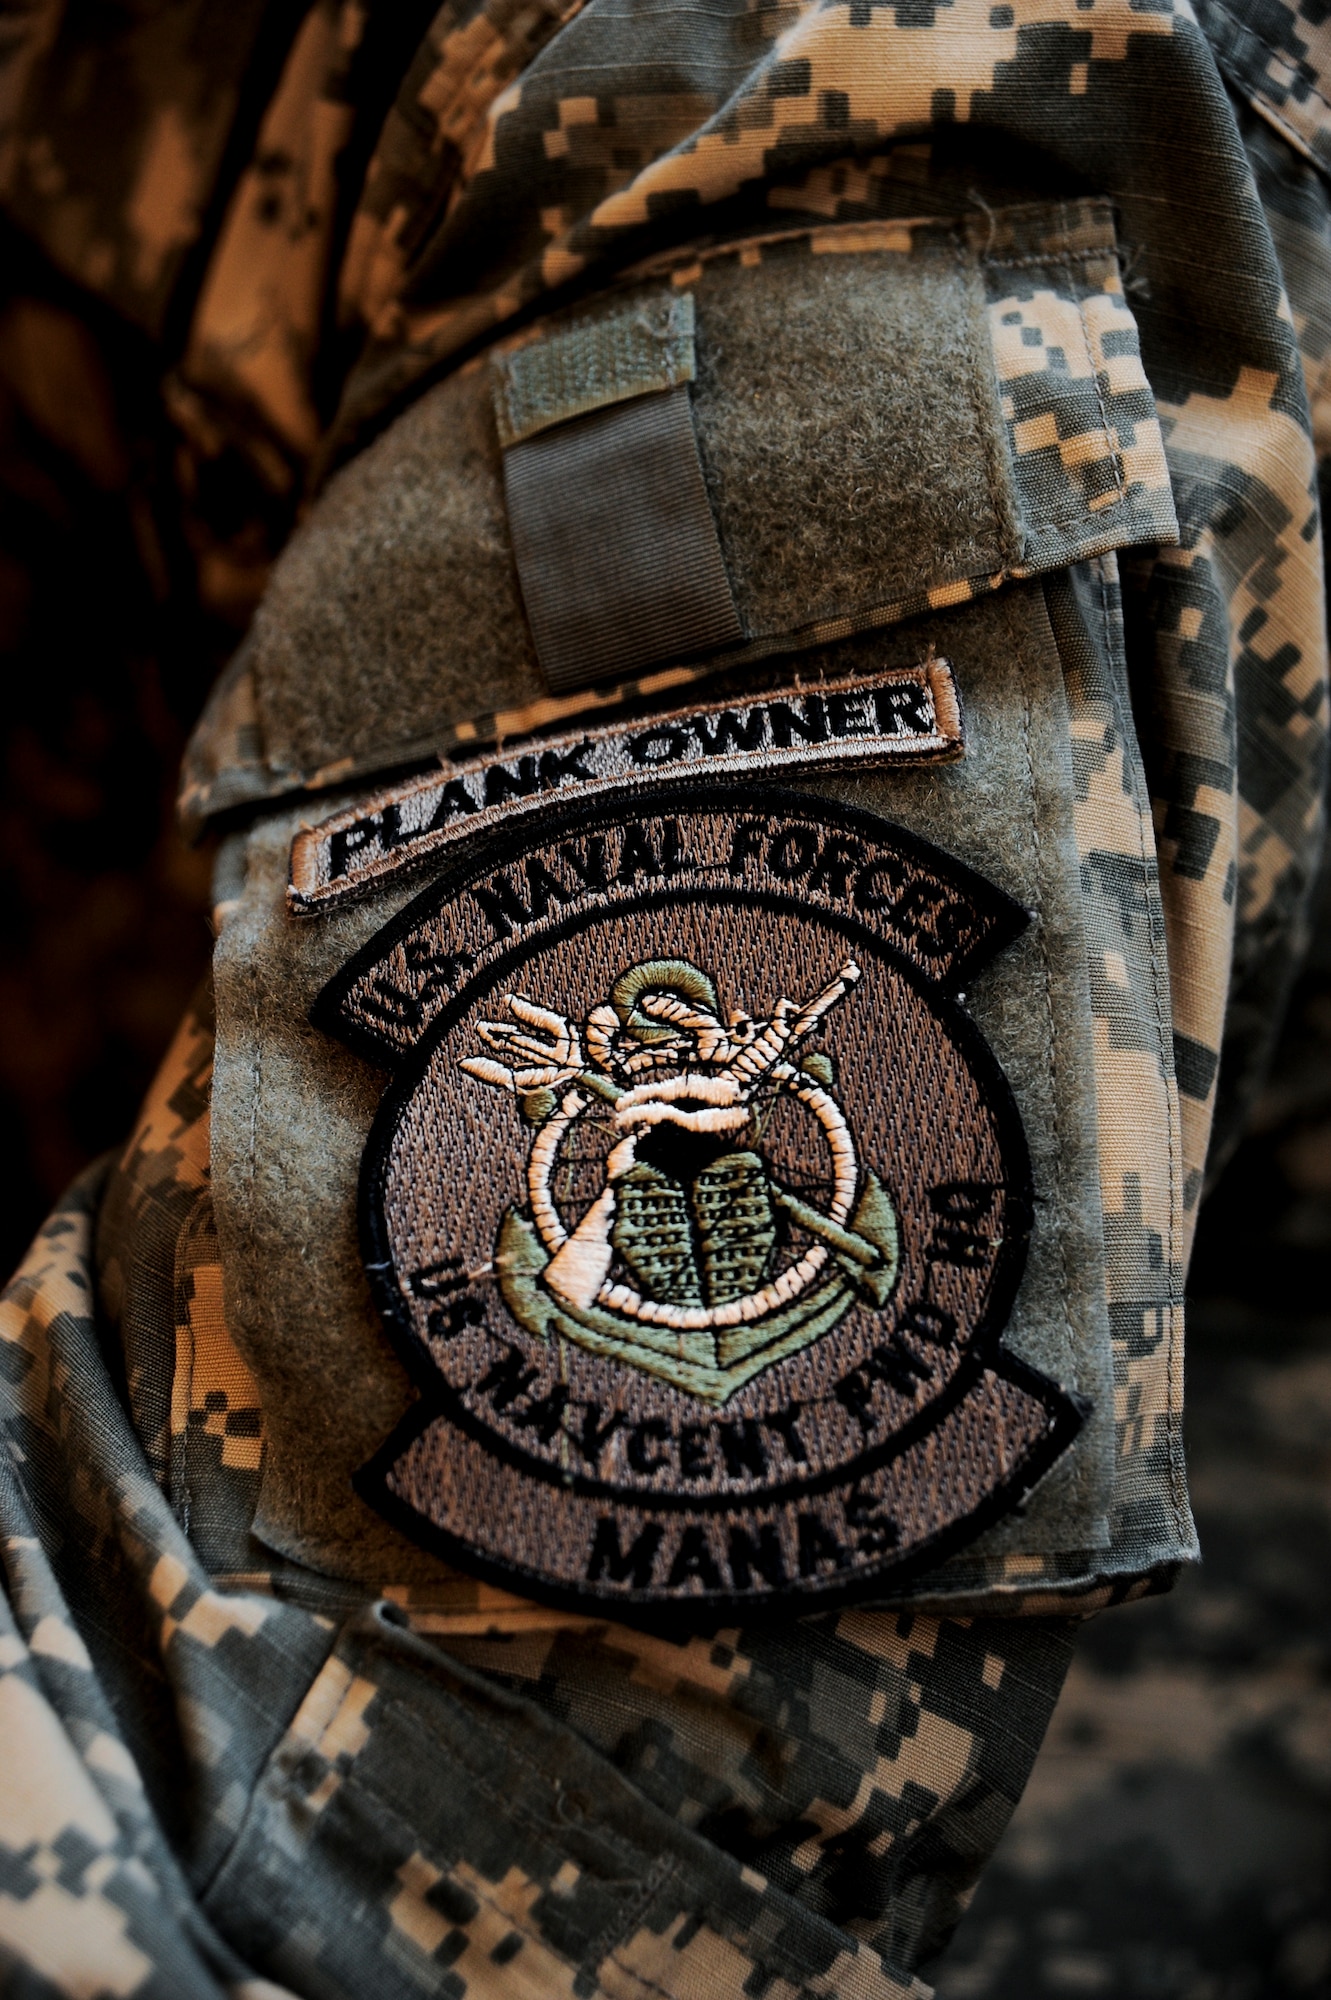 A proudly worn "Plank Owner" patch sits above the "U.S. Naval Forces Central Command Forward Headquarters Manas" patch Jan. 24, 2012, on a Sailor at the Transit Center at Manas, Kyrgyzstan. A plank owner is a member of the ship's crew when the vessel is  placed in commission. Today a plank owner is often applied to members of newly commissioned units, new military bases and recommissioning crews.(U.S. Air Force Photo/Staff Sgt. Angela Ruiz)